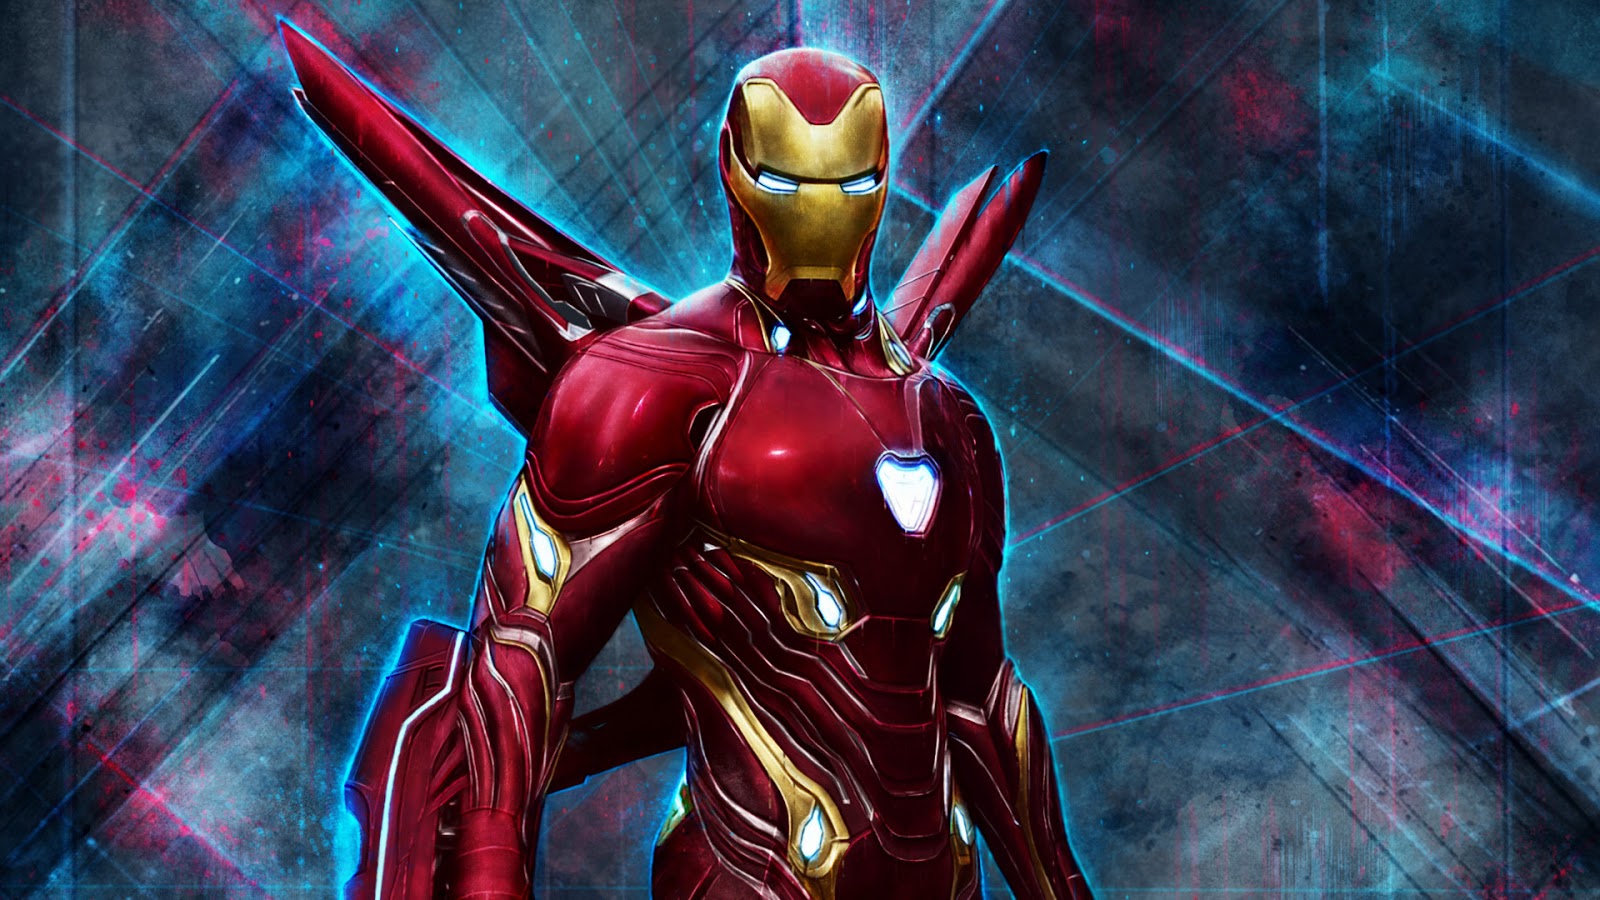 Iron Man Hd Wallpapers From Infinity War Download In 4k